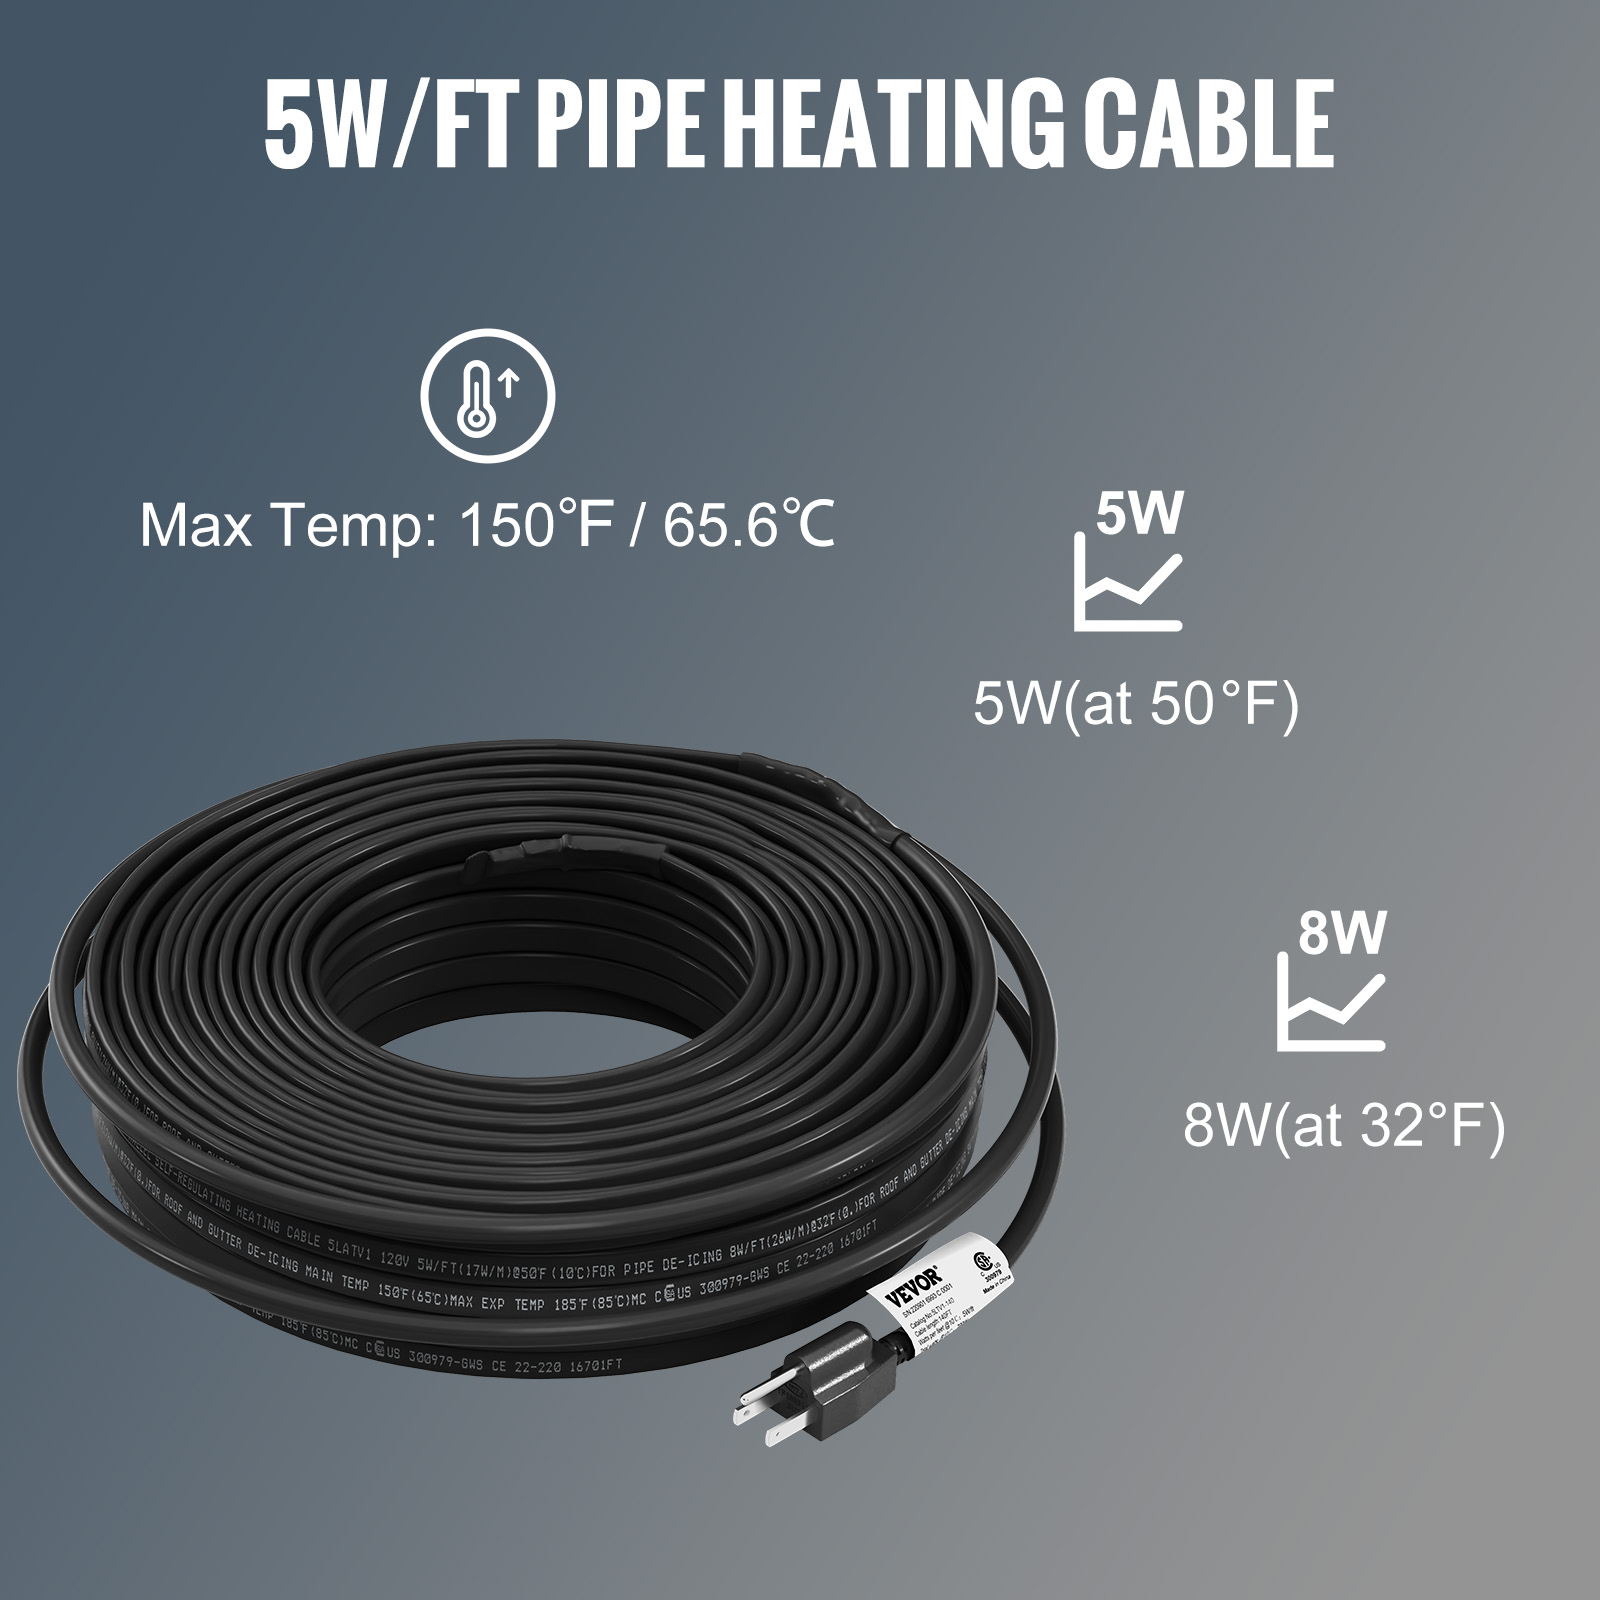 VEVOR Self-Regulating Pipe Heating Cable, 24-feet 5W/ft, 55% OFF